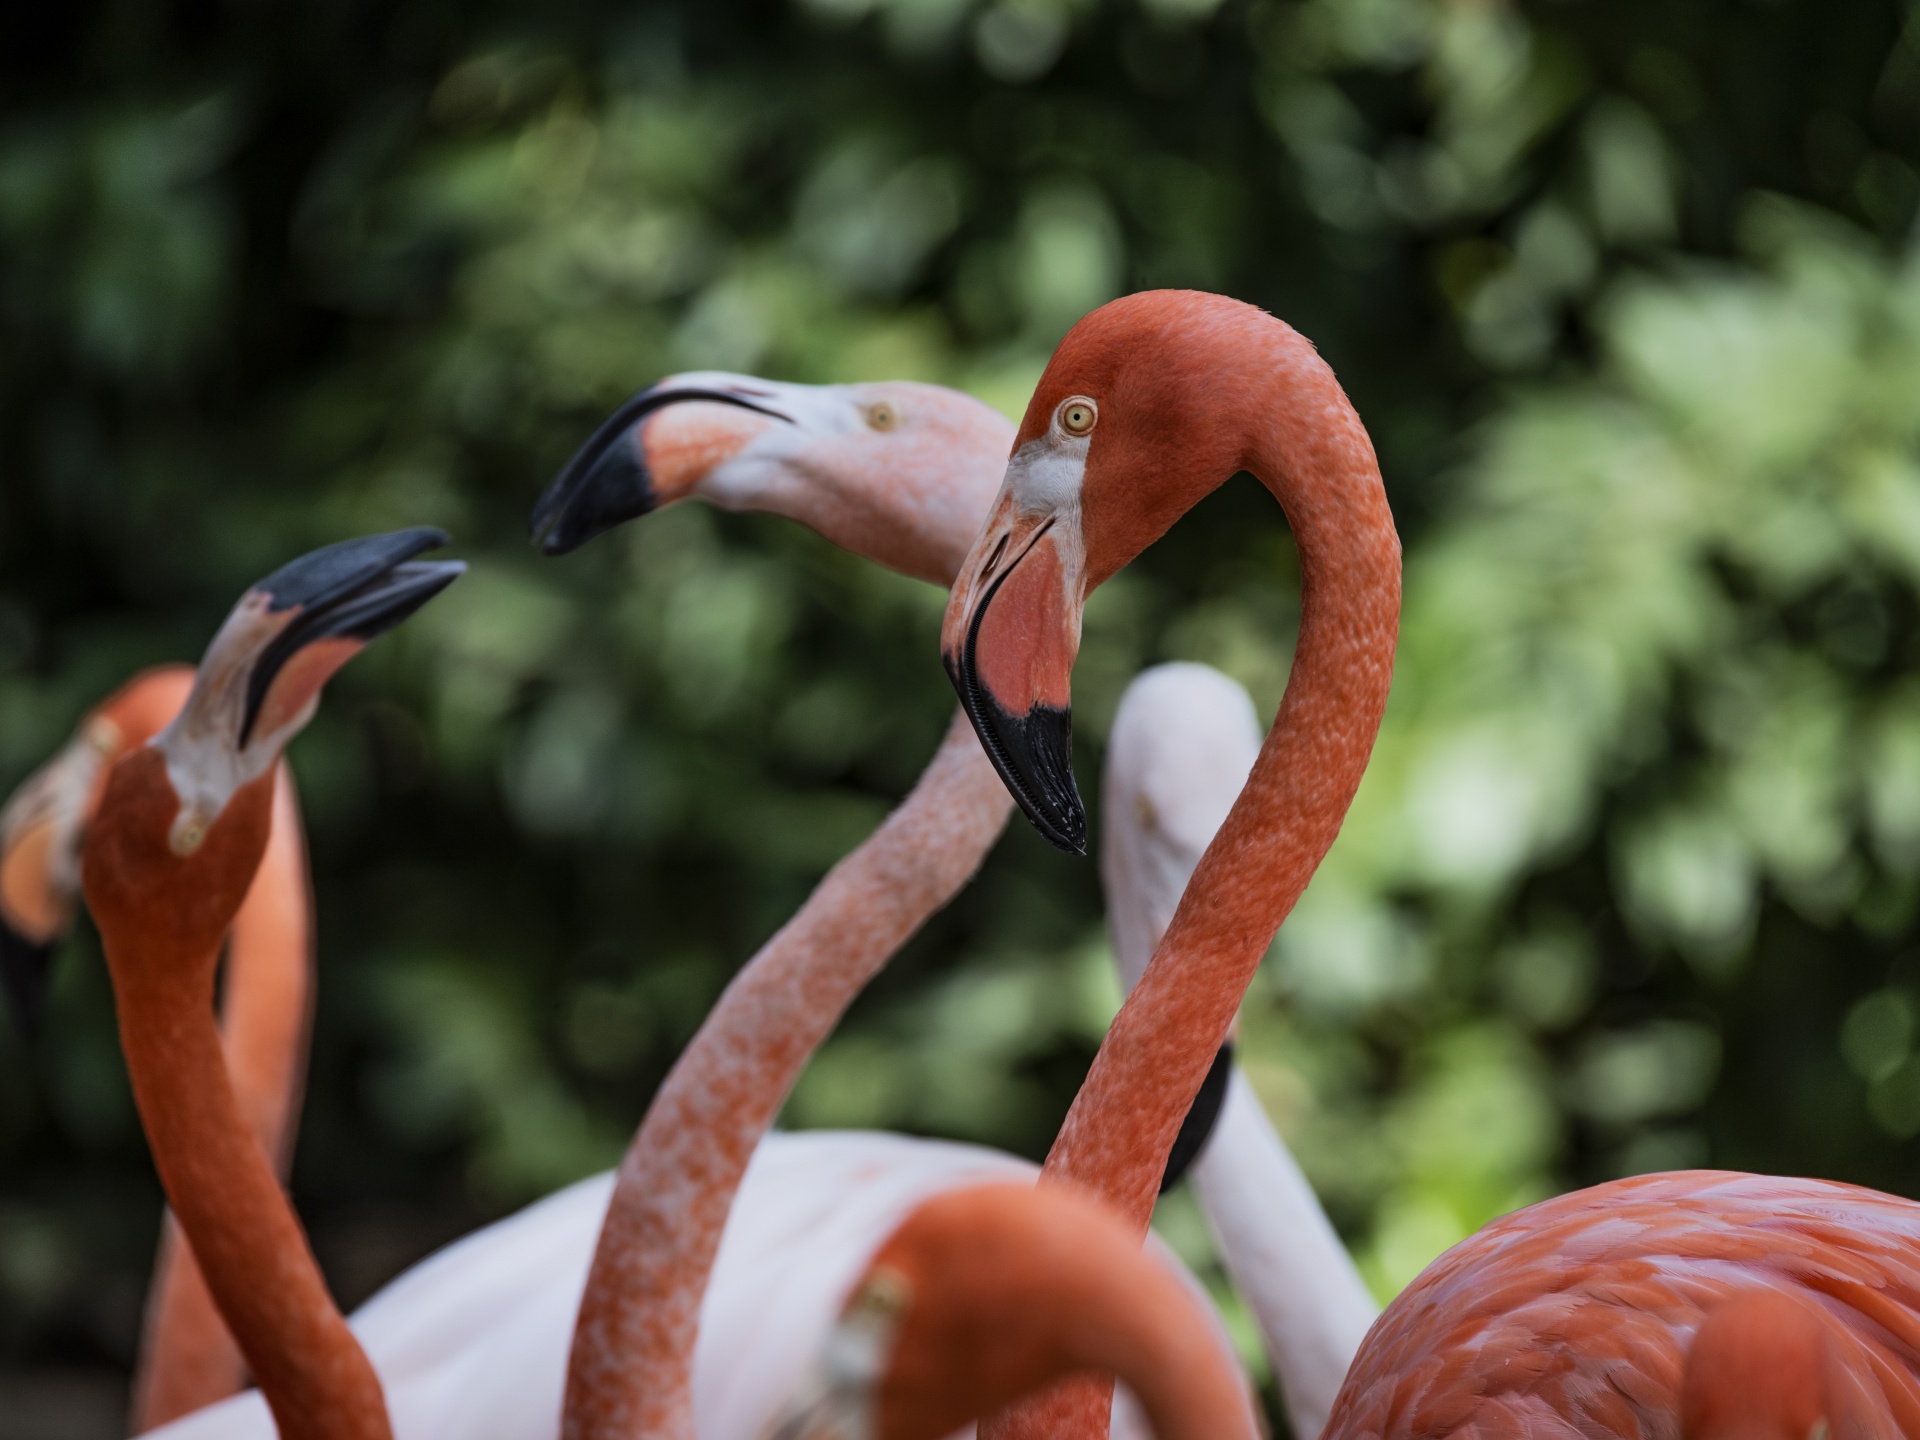 Flamingos talking and exchanging looks